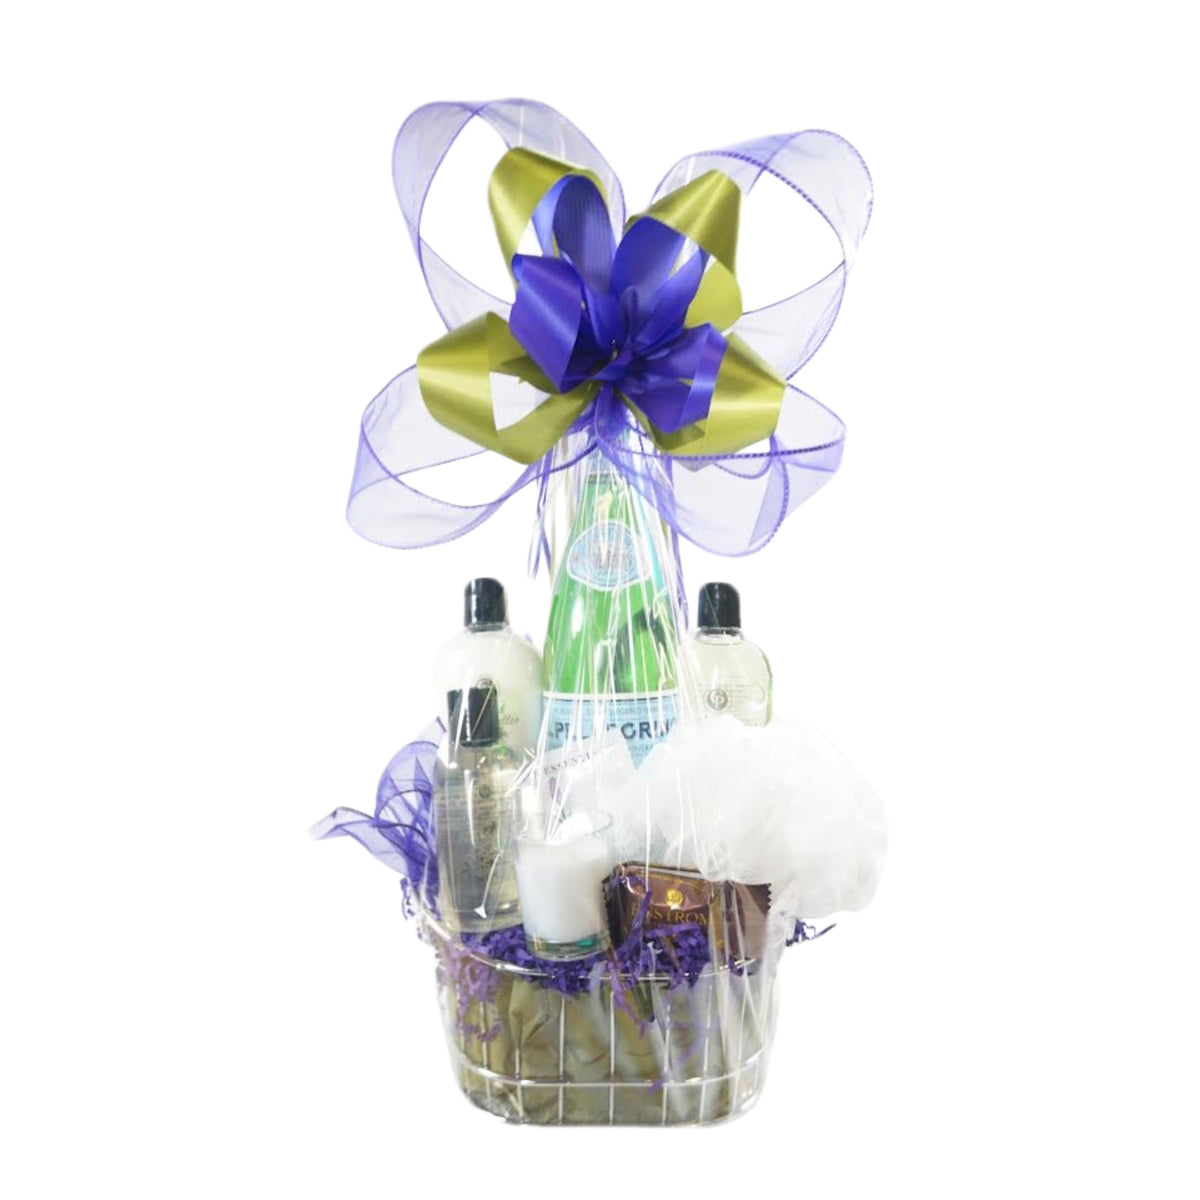 Womens Day Gift Basket